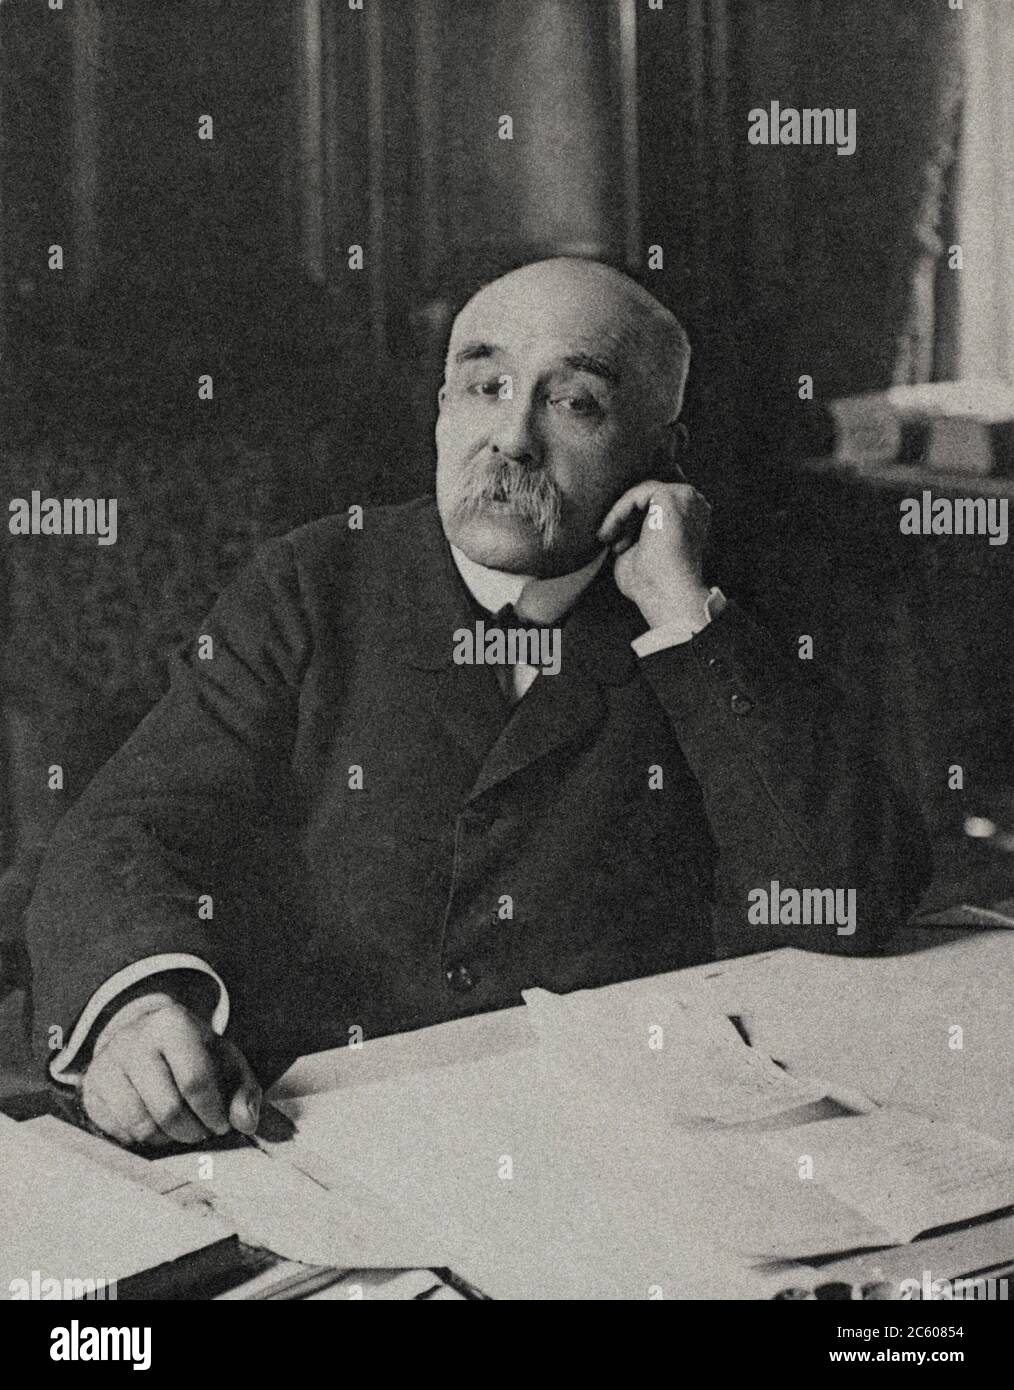 Retro photo of Georges Clemenceau (1841 – 1929), a French statesman who served as Prime Minister of France from 1906 to 1909 and again from 1917 until Stock Photo